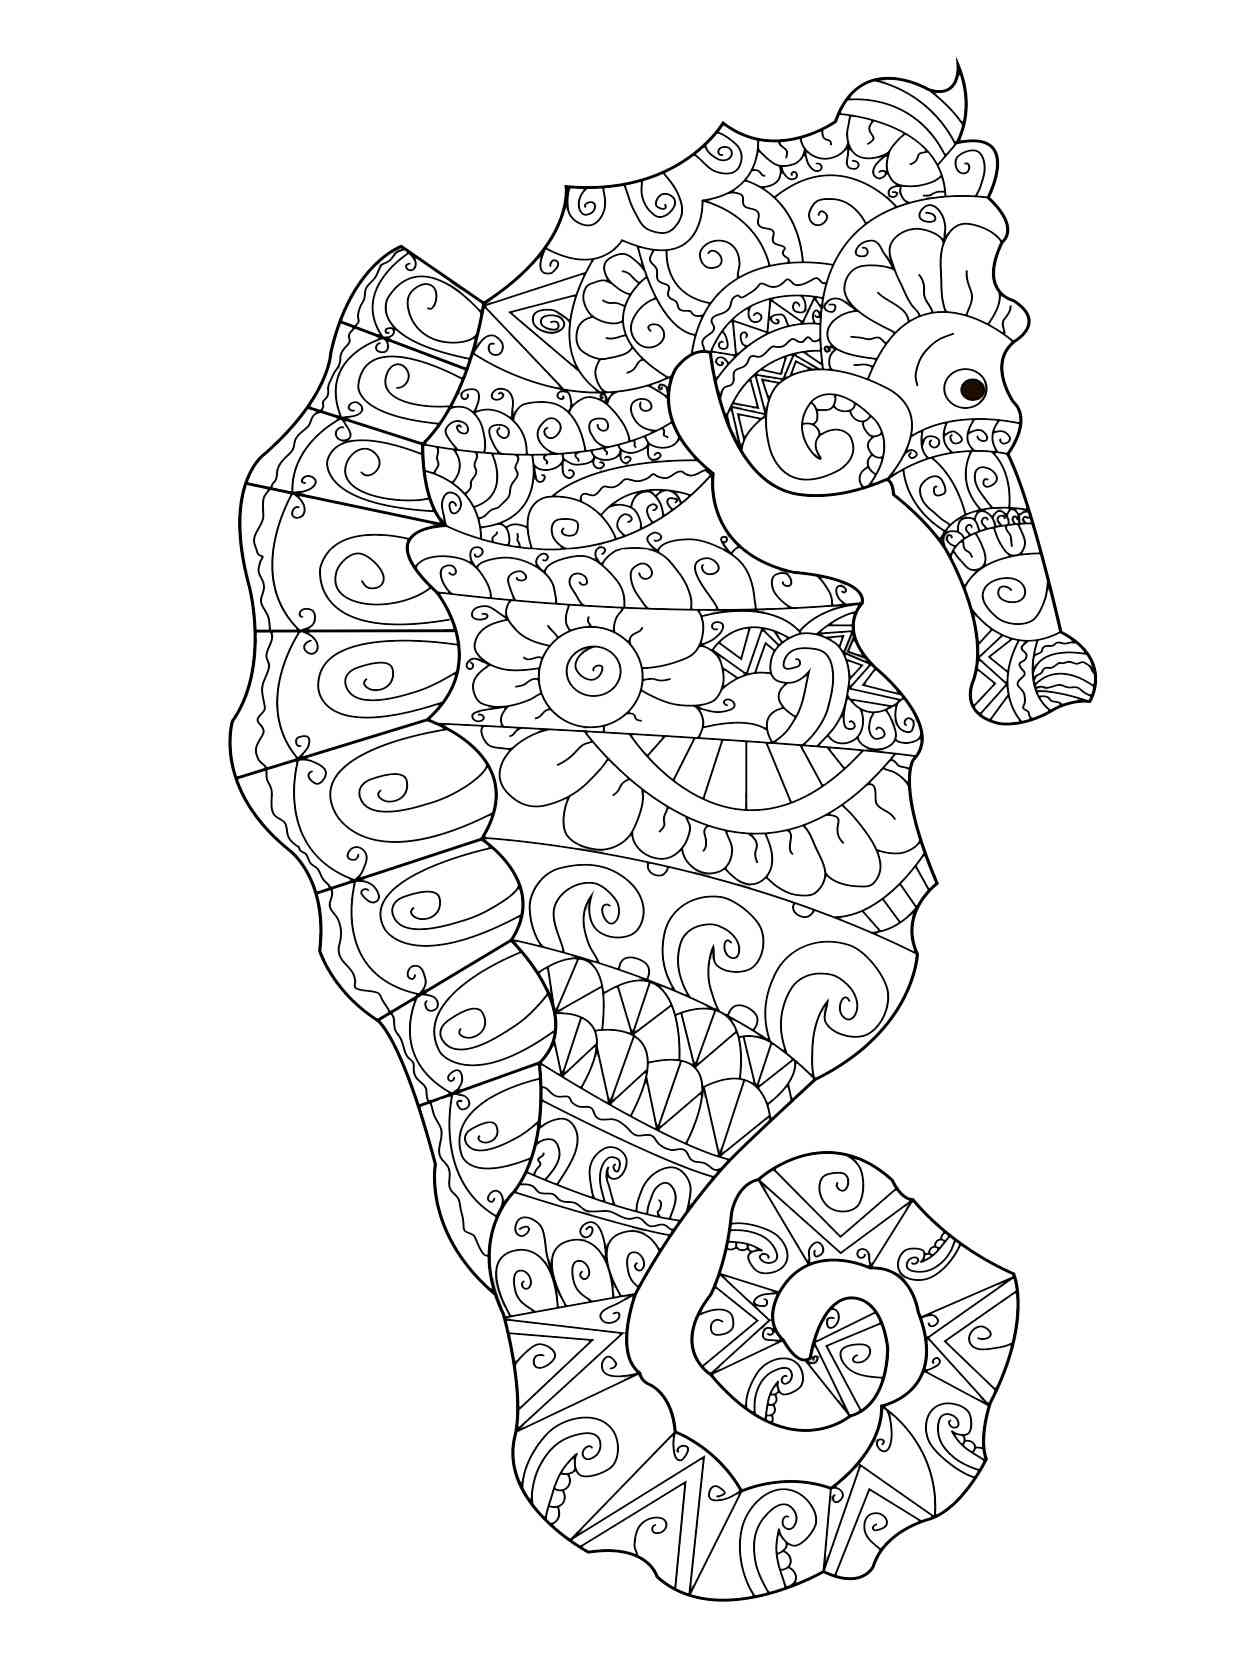 Seahorse coloring pages for adults